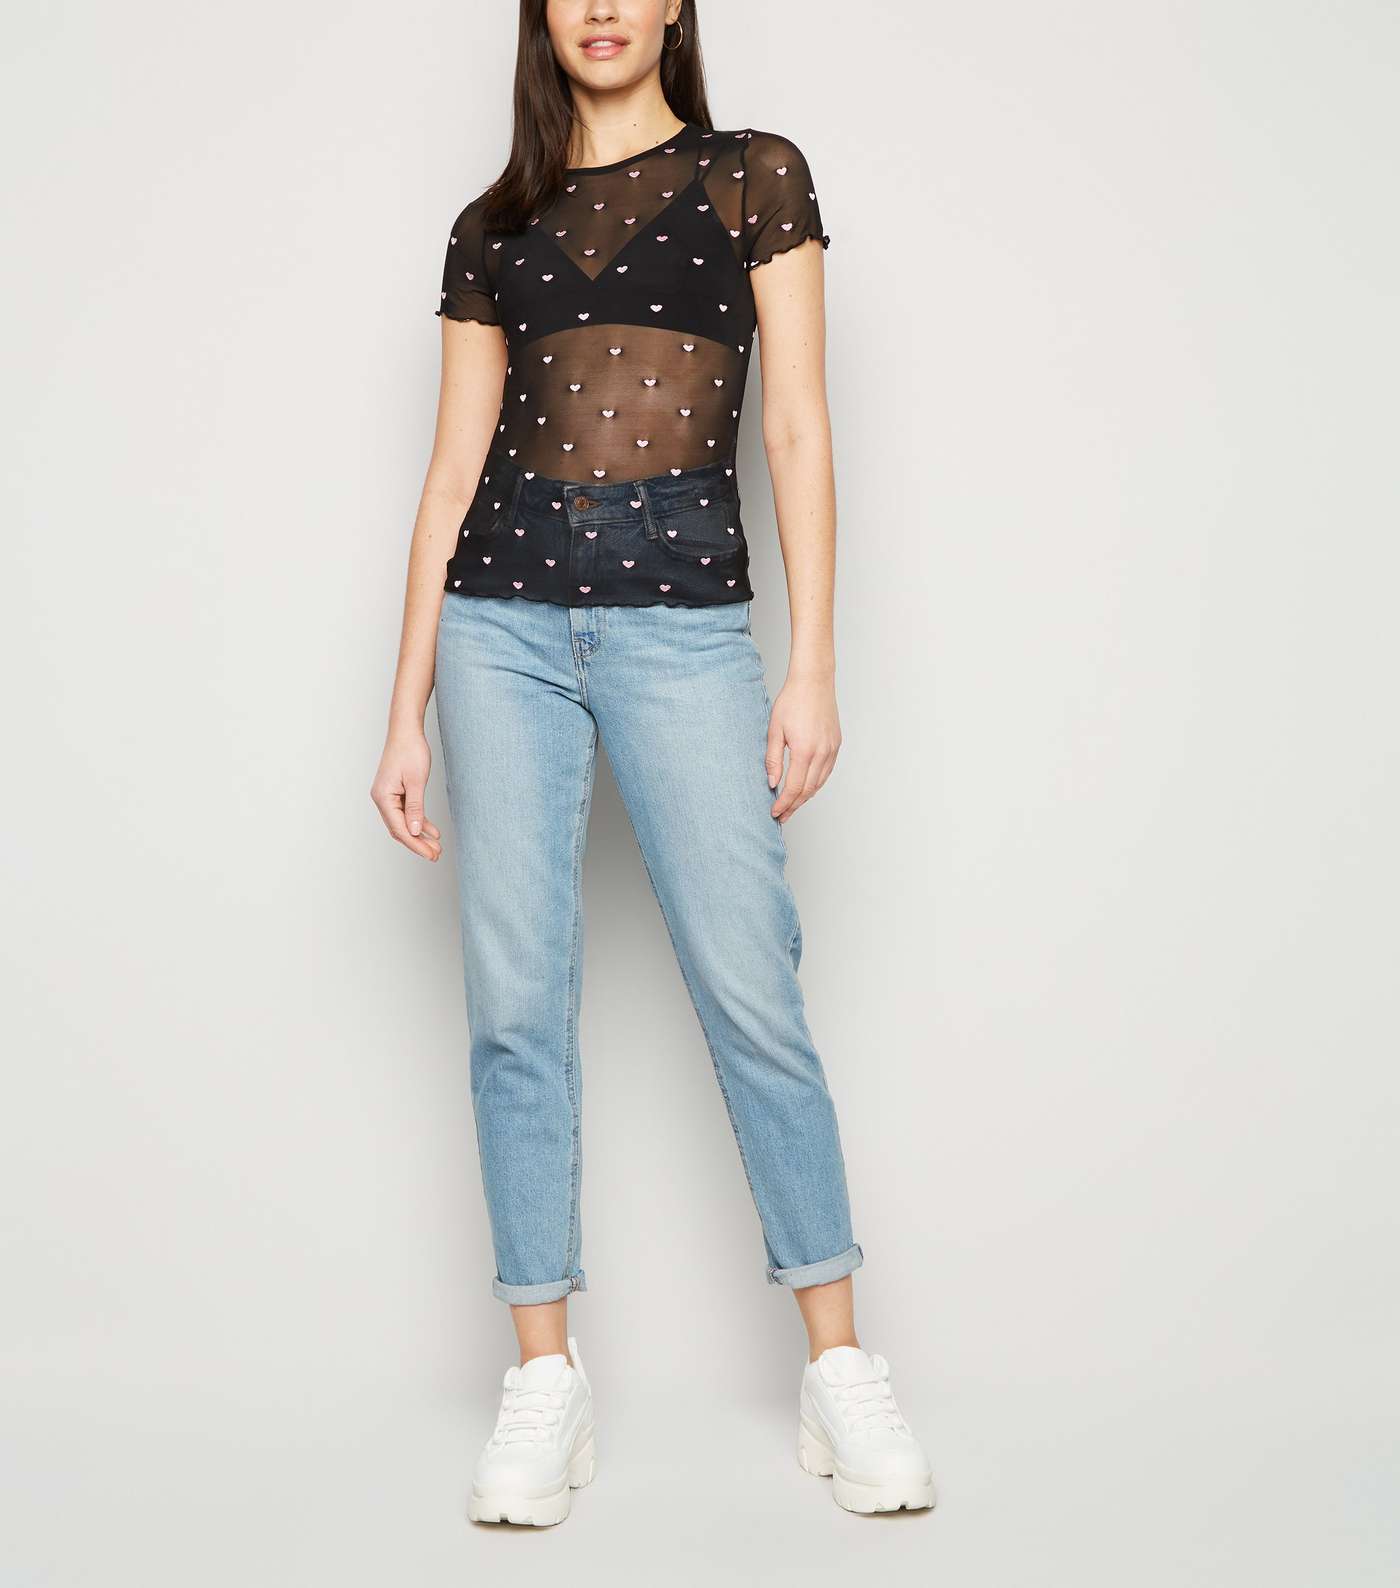 Black Heart Embroidered Mesh Top Image 2